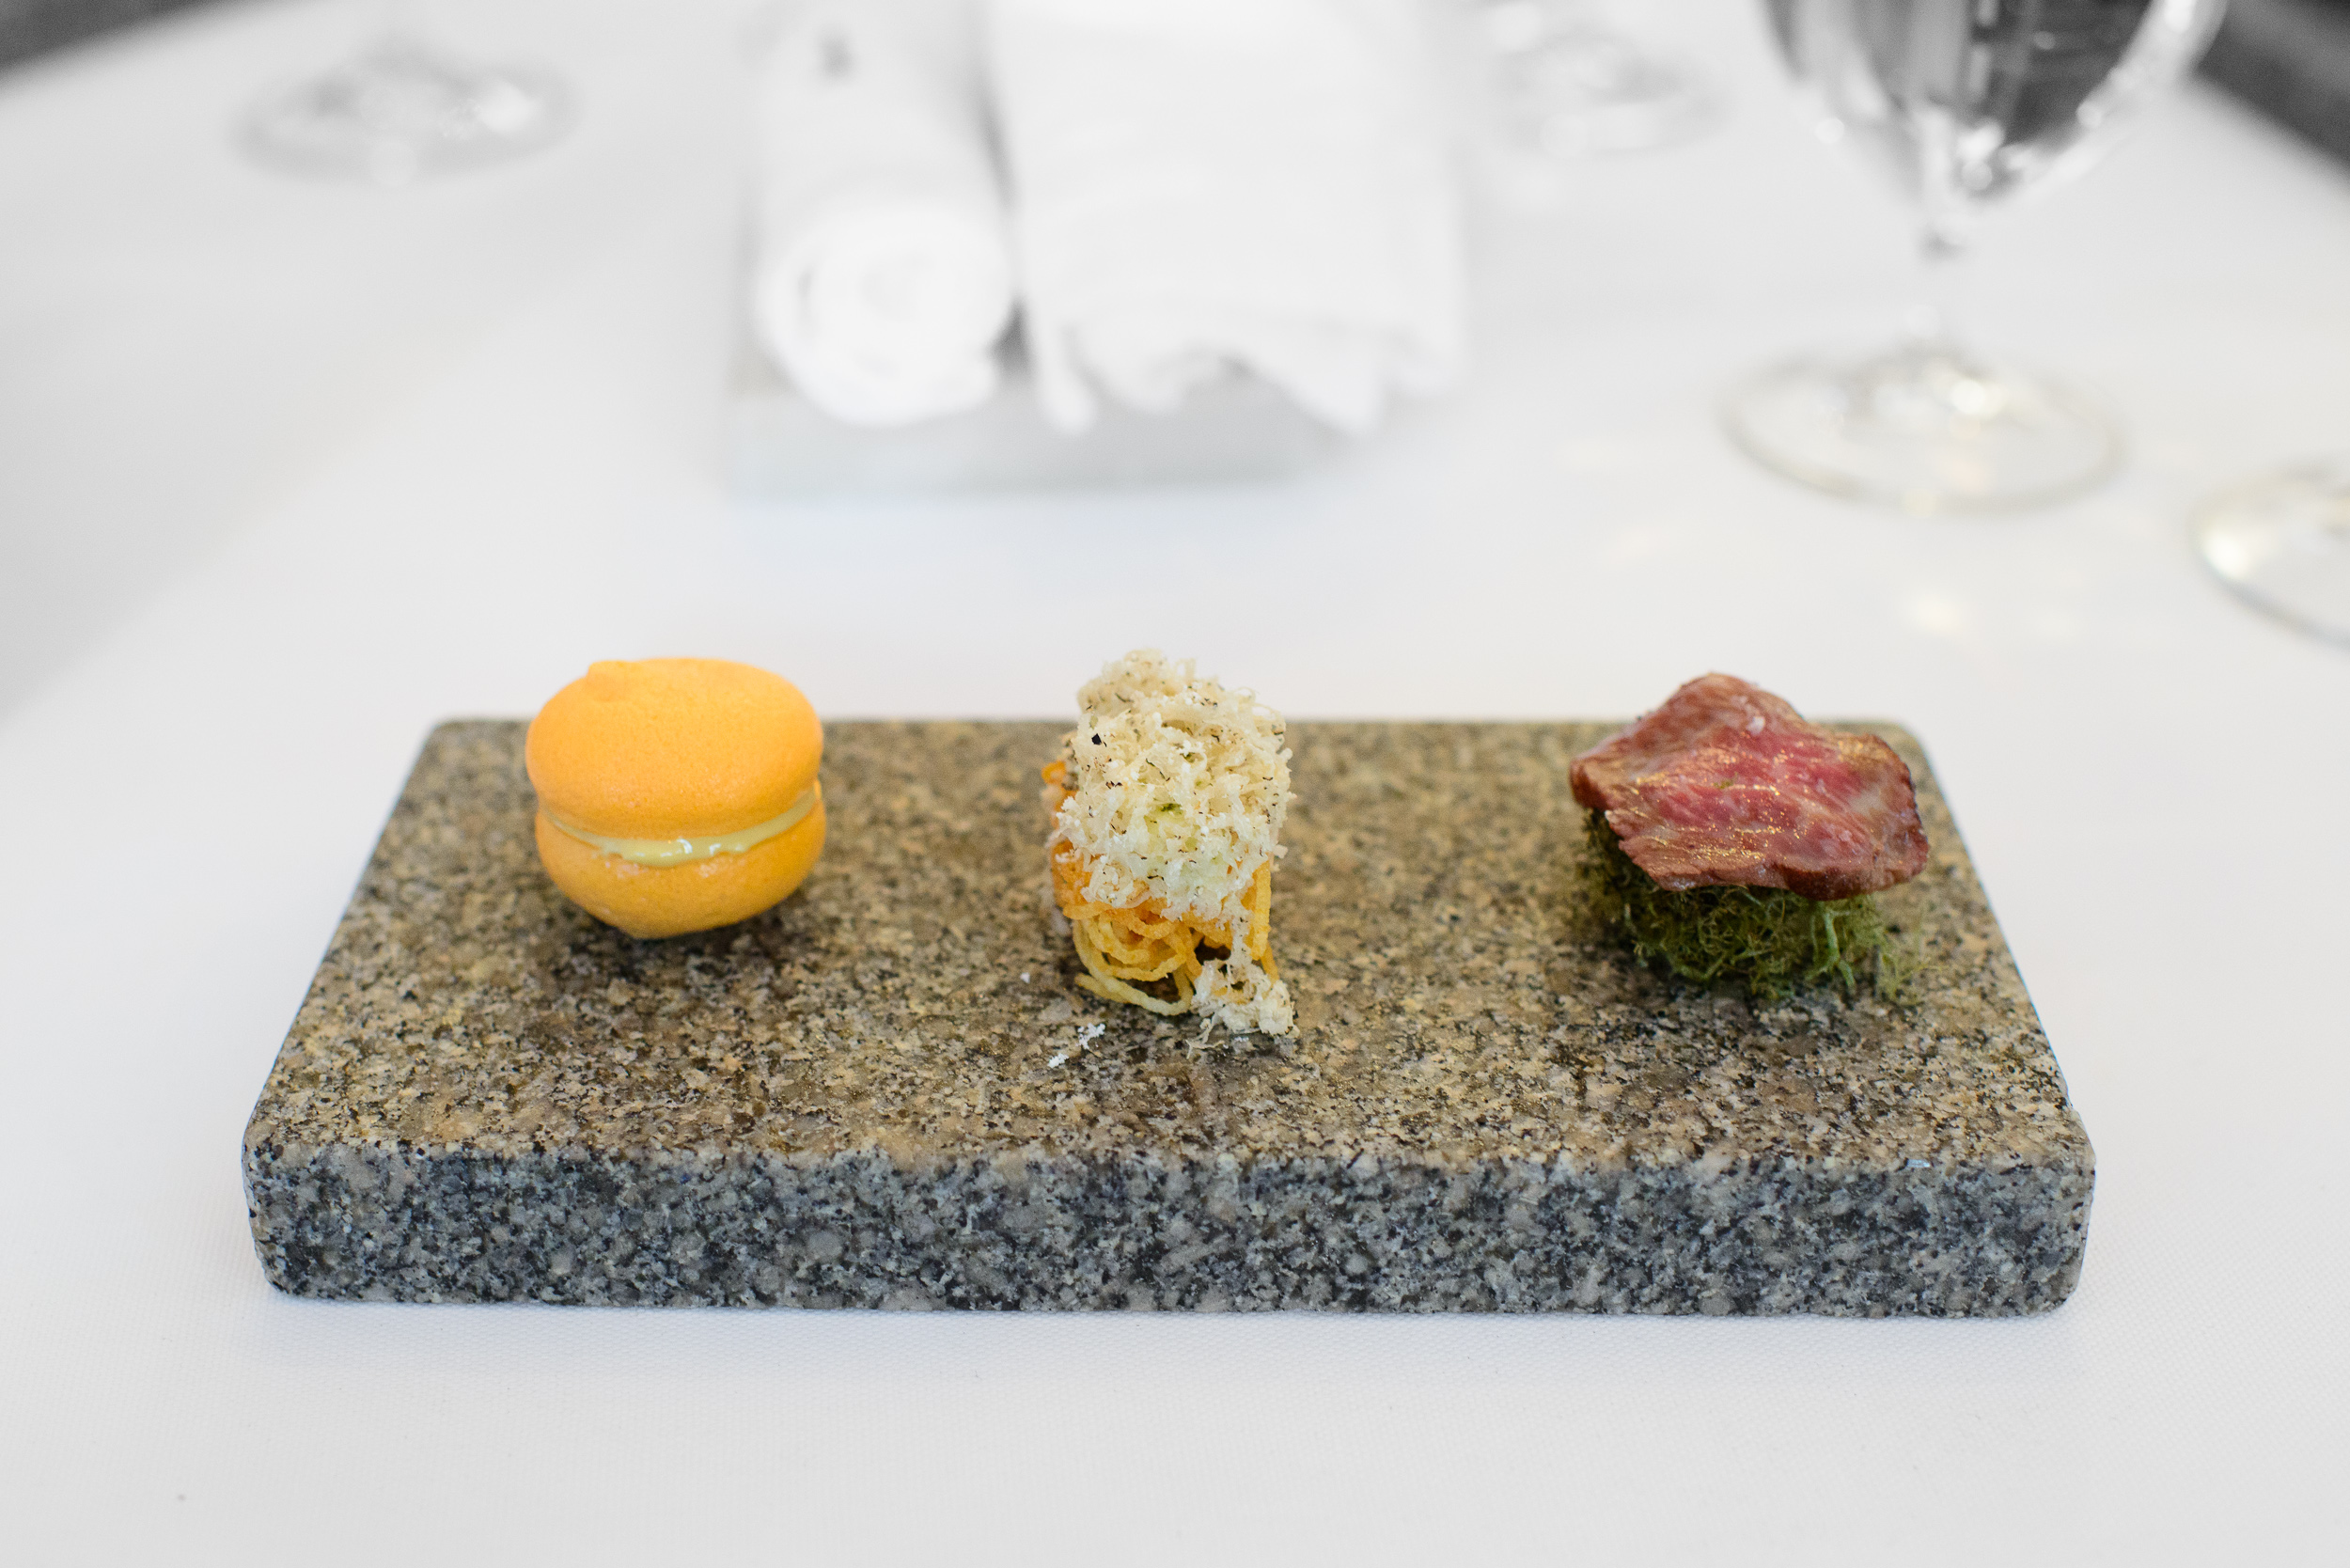 1st Course: Beef from A. Larsson, lichens, and ash, carrot and f